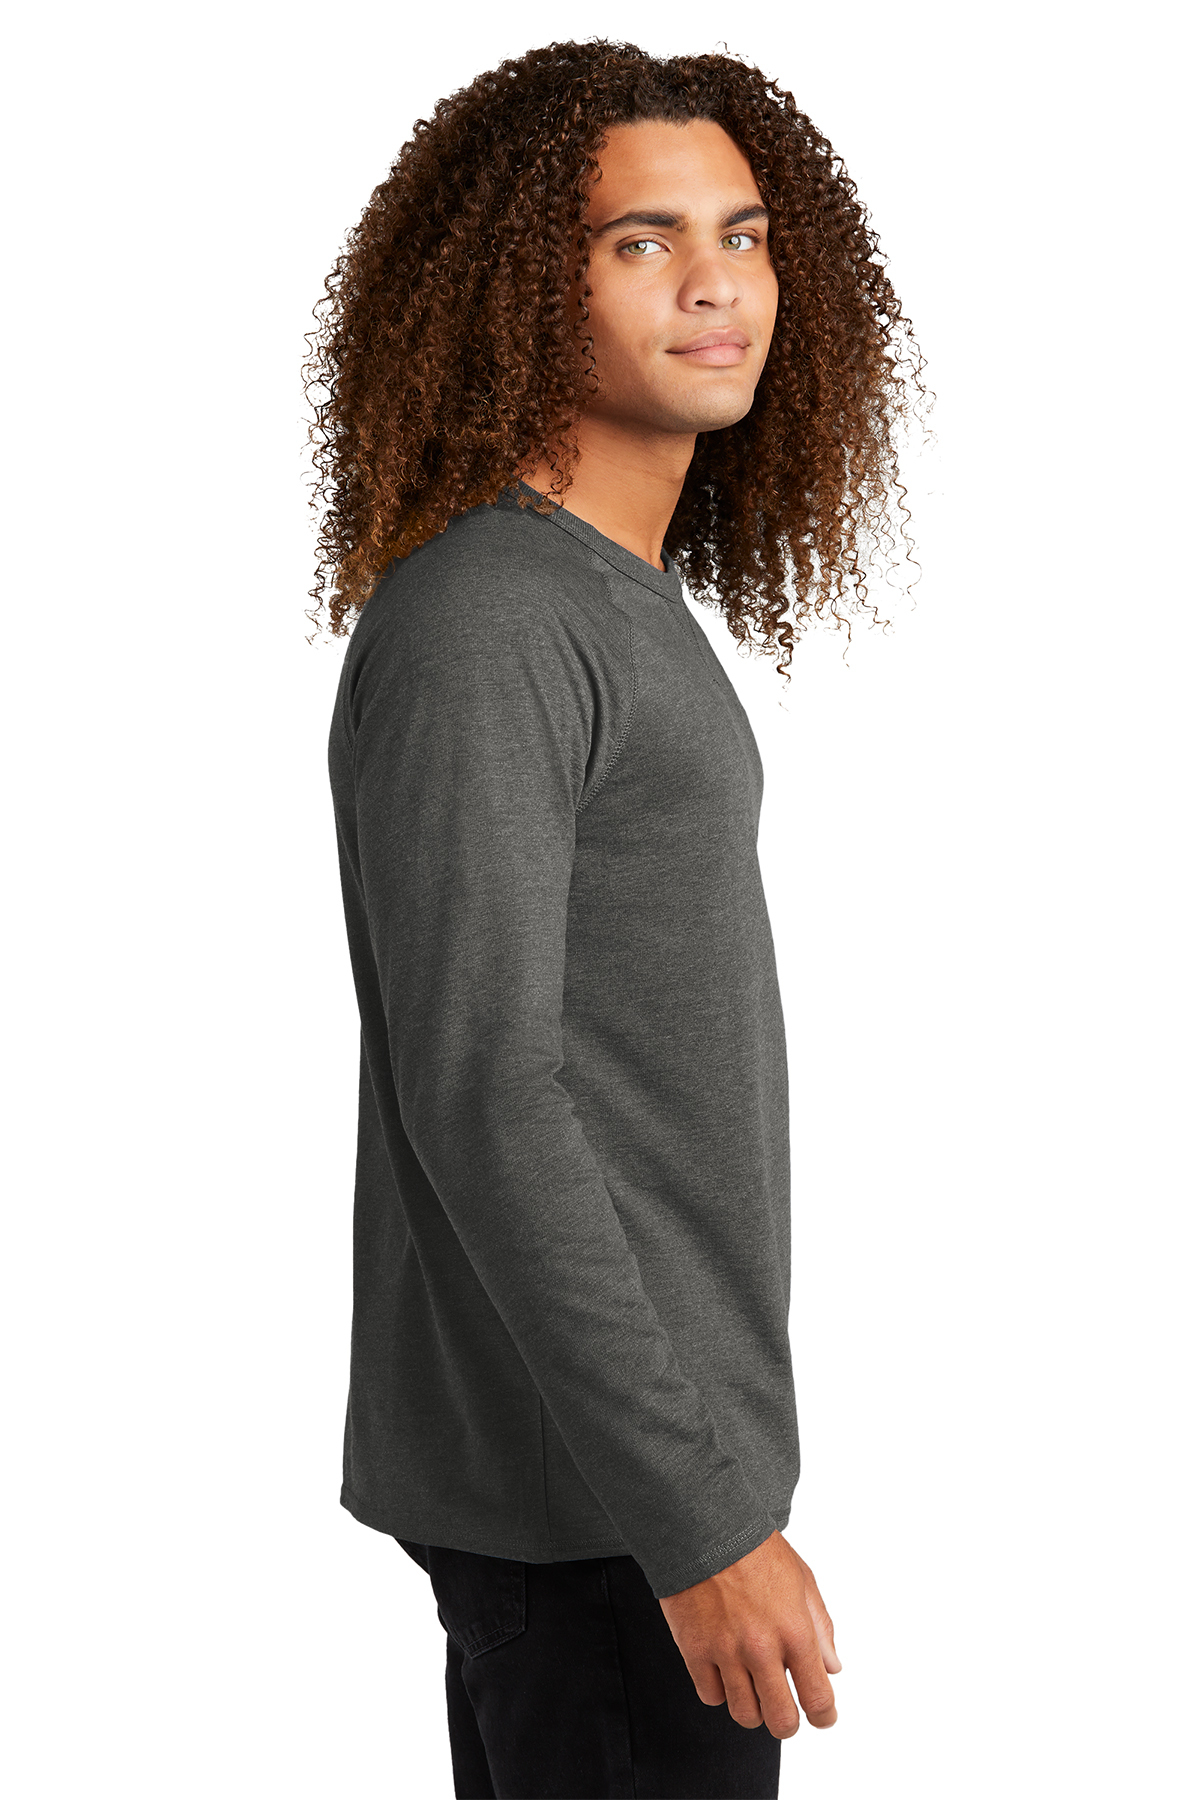 Product French Crewneck Featherweight Terry | SanMar Long | Sleeve District